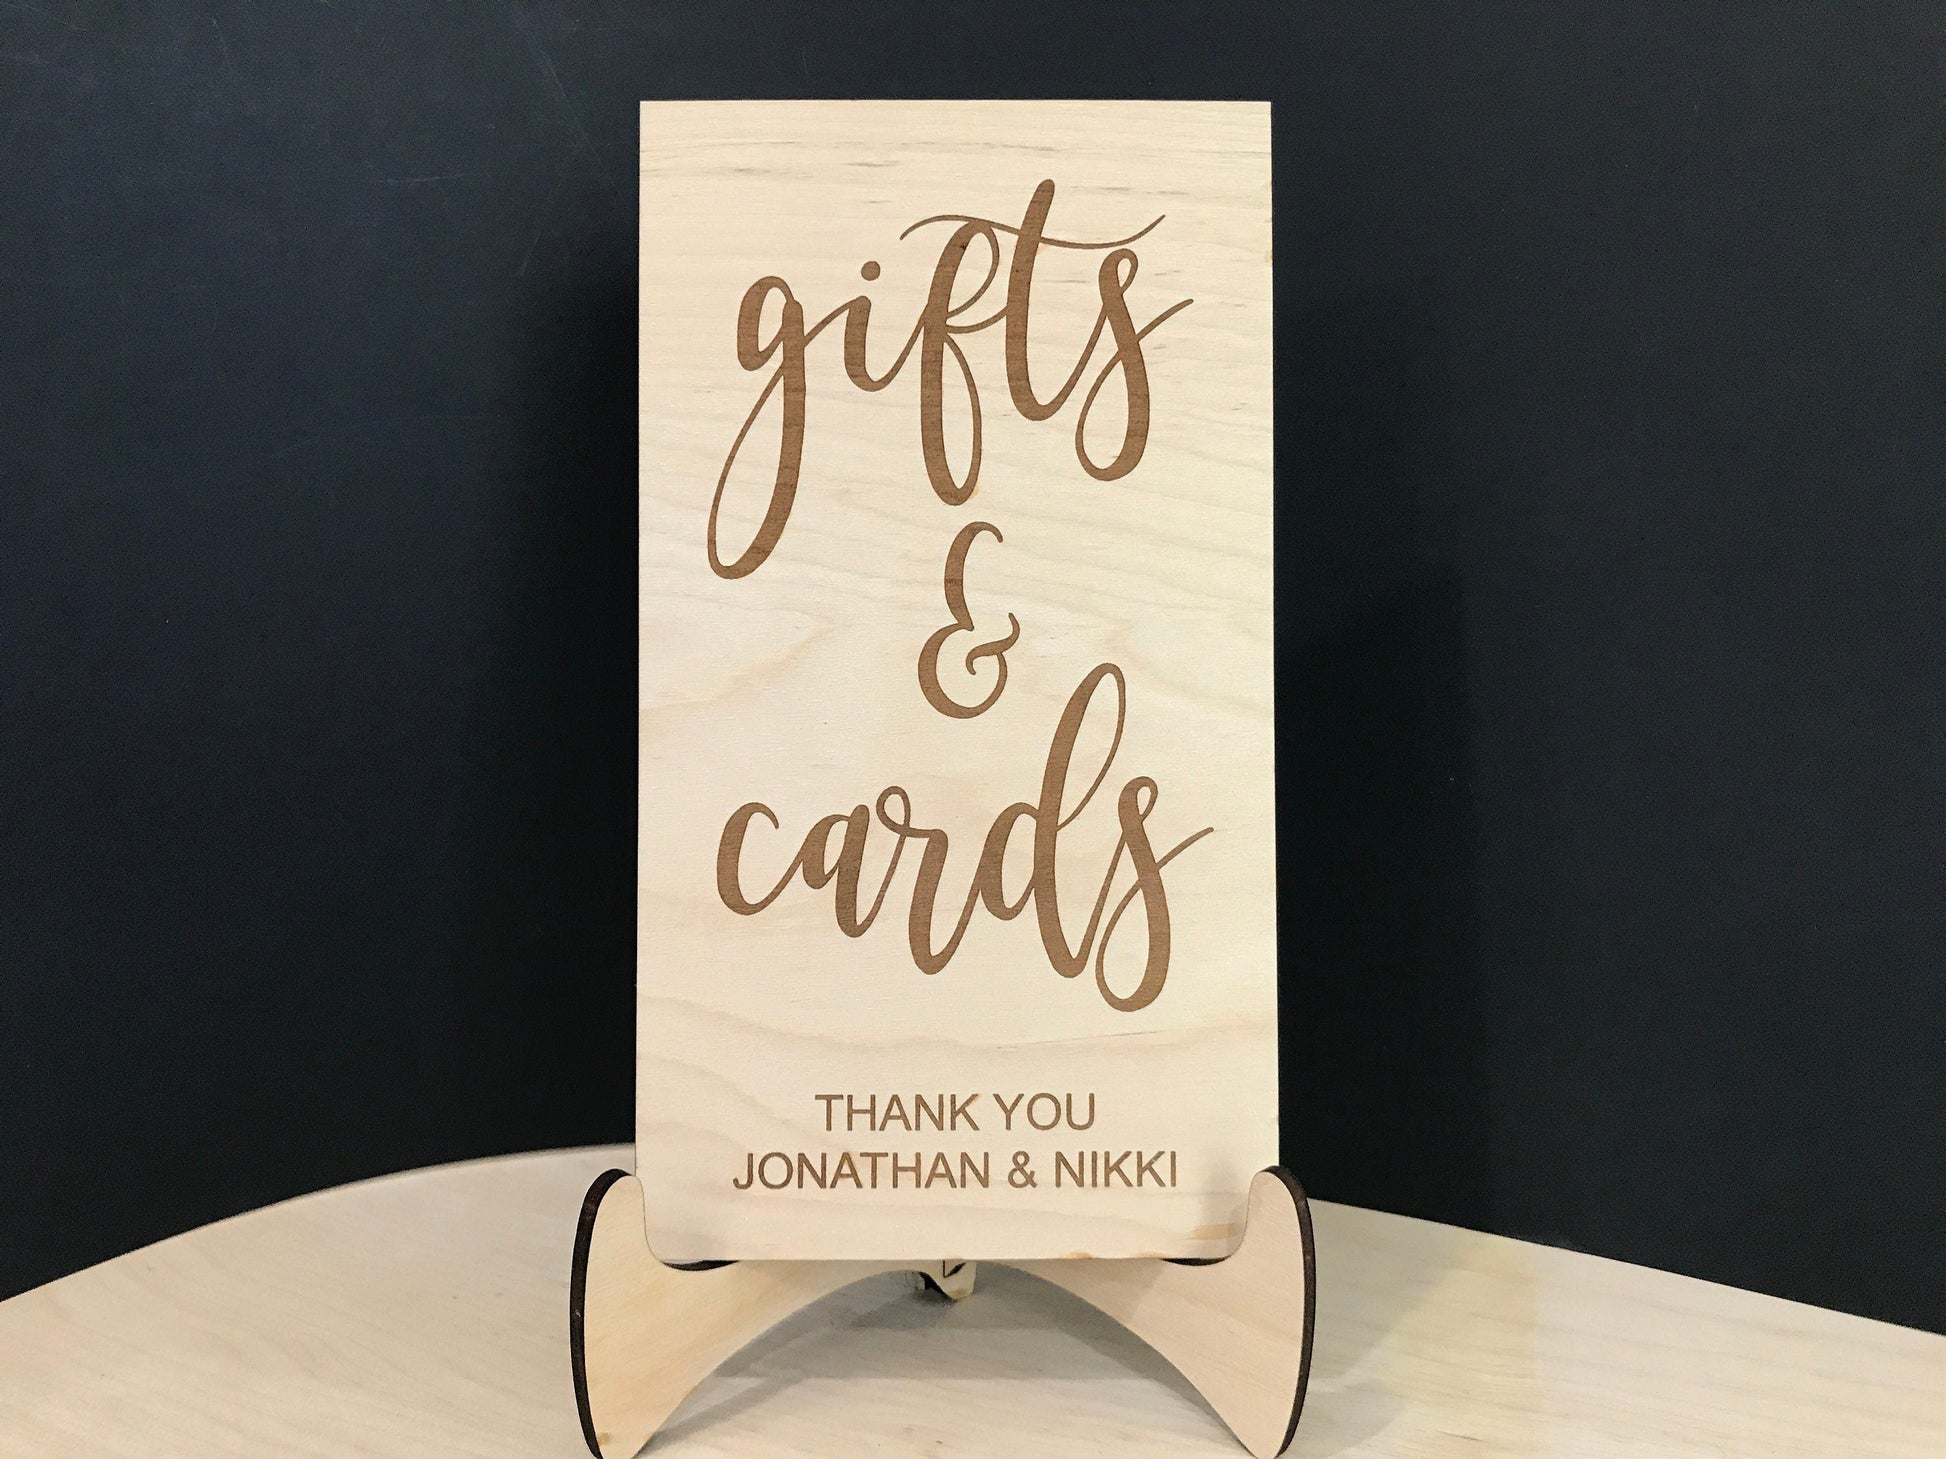 engraved gifts and cards sign - rustic wedding decor 